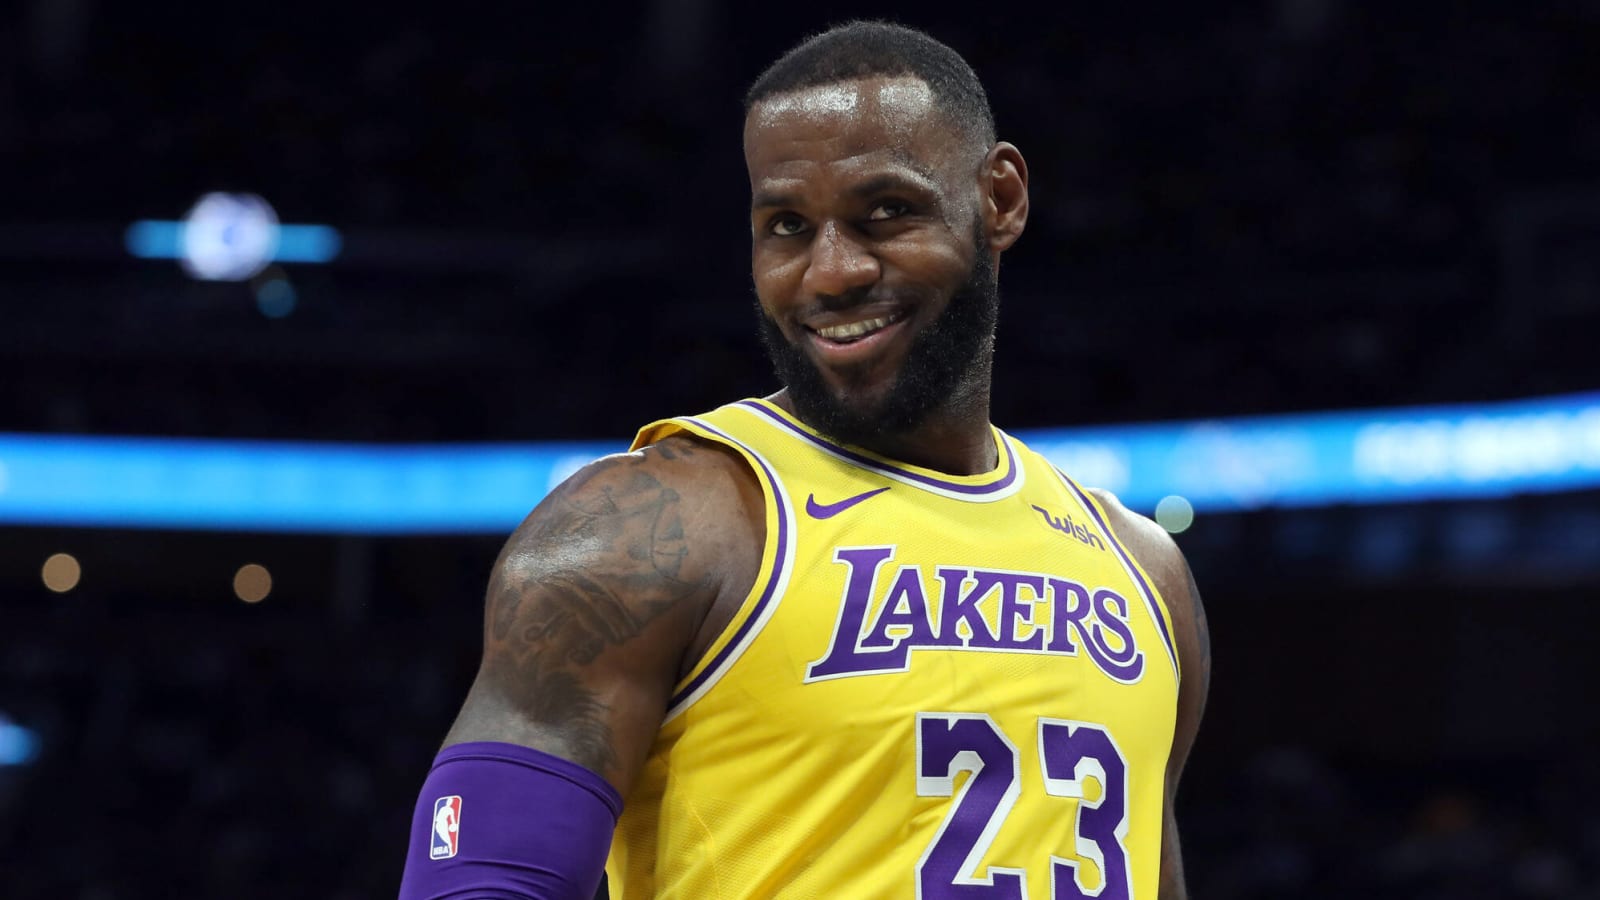 LeBron James ‘extremely happy’ in L.A. despite recent Lakers' struggles